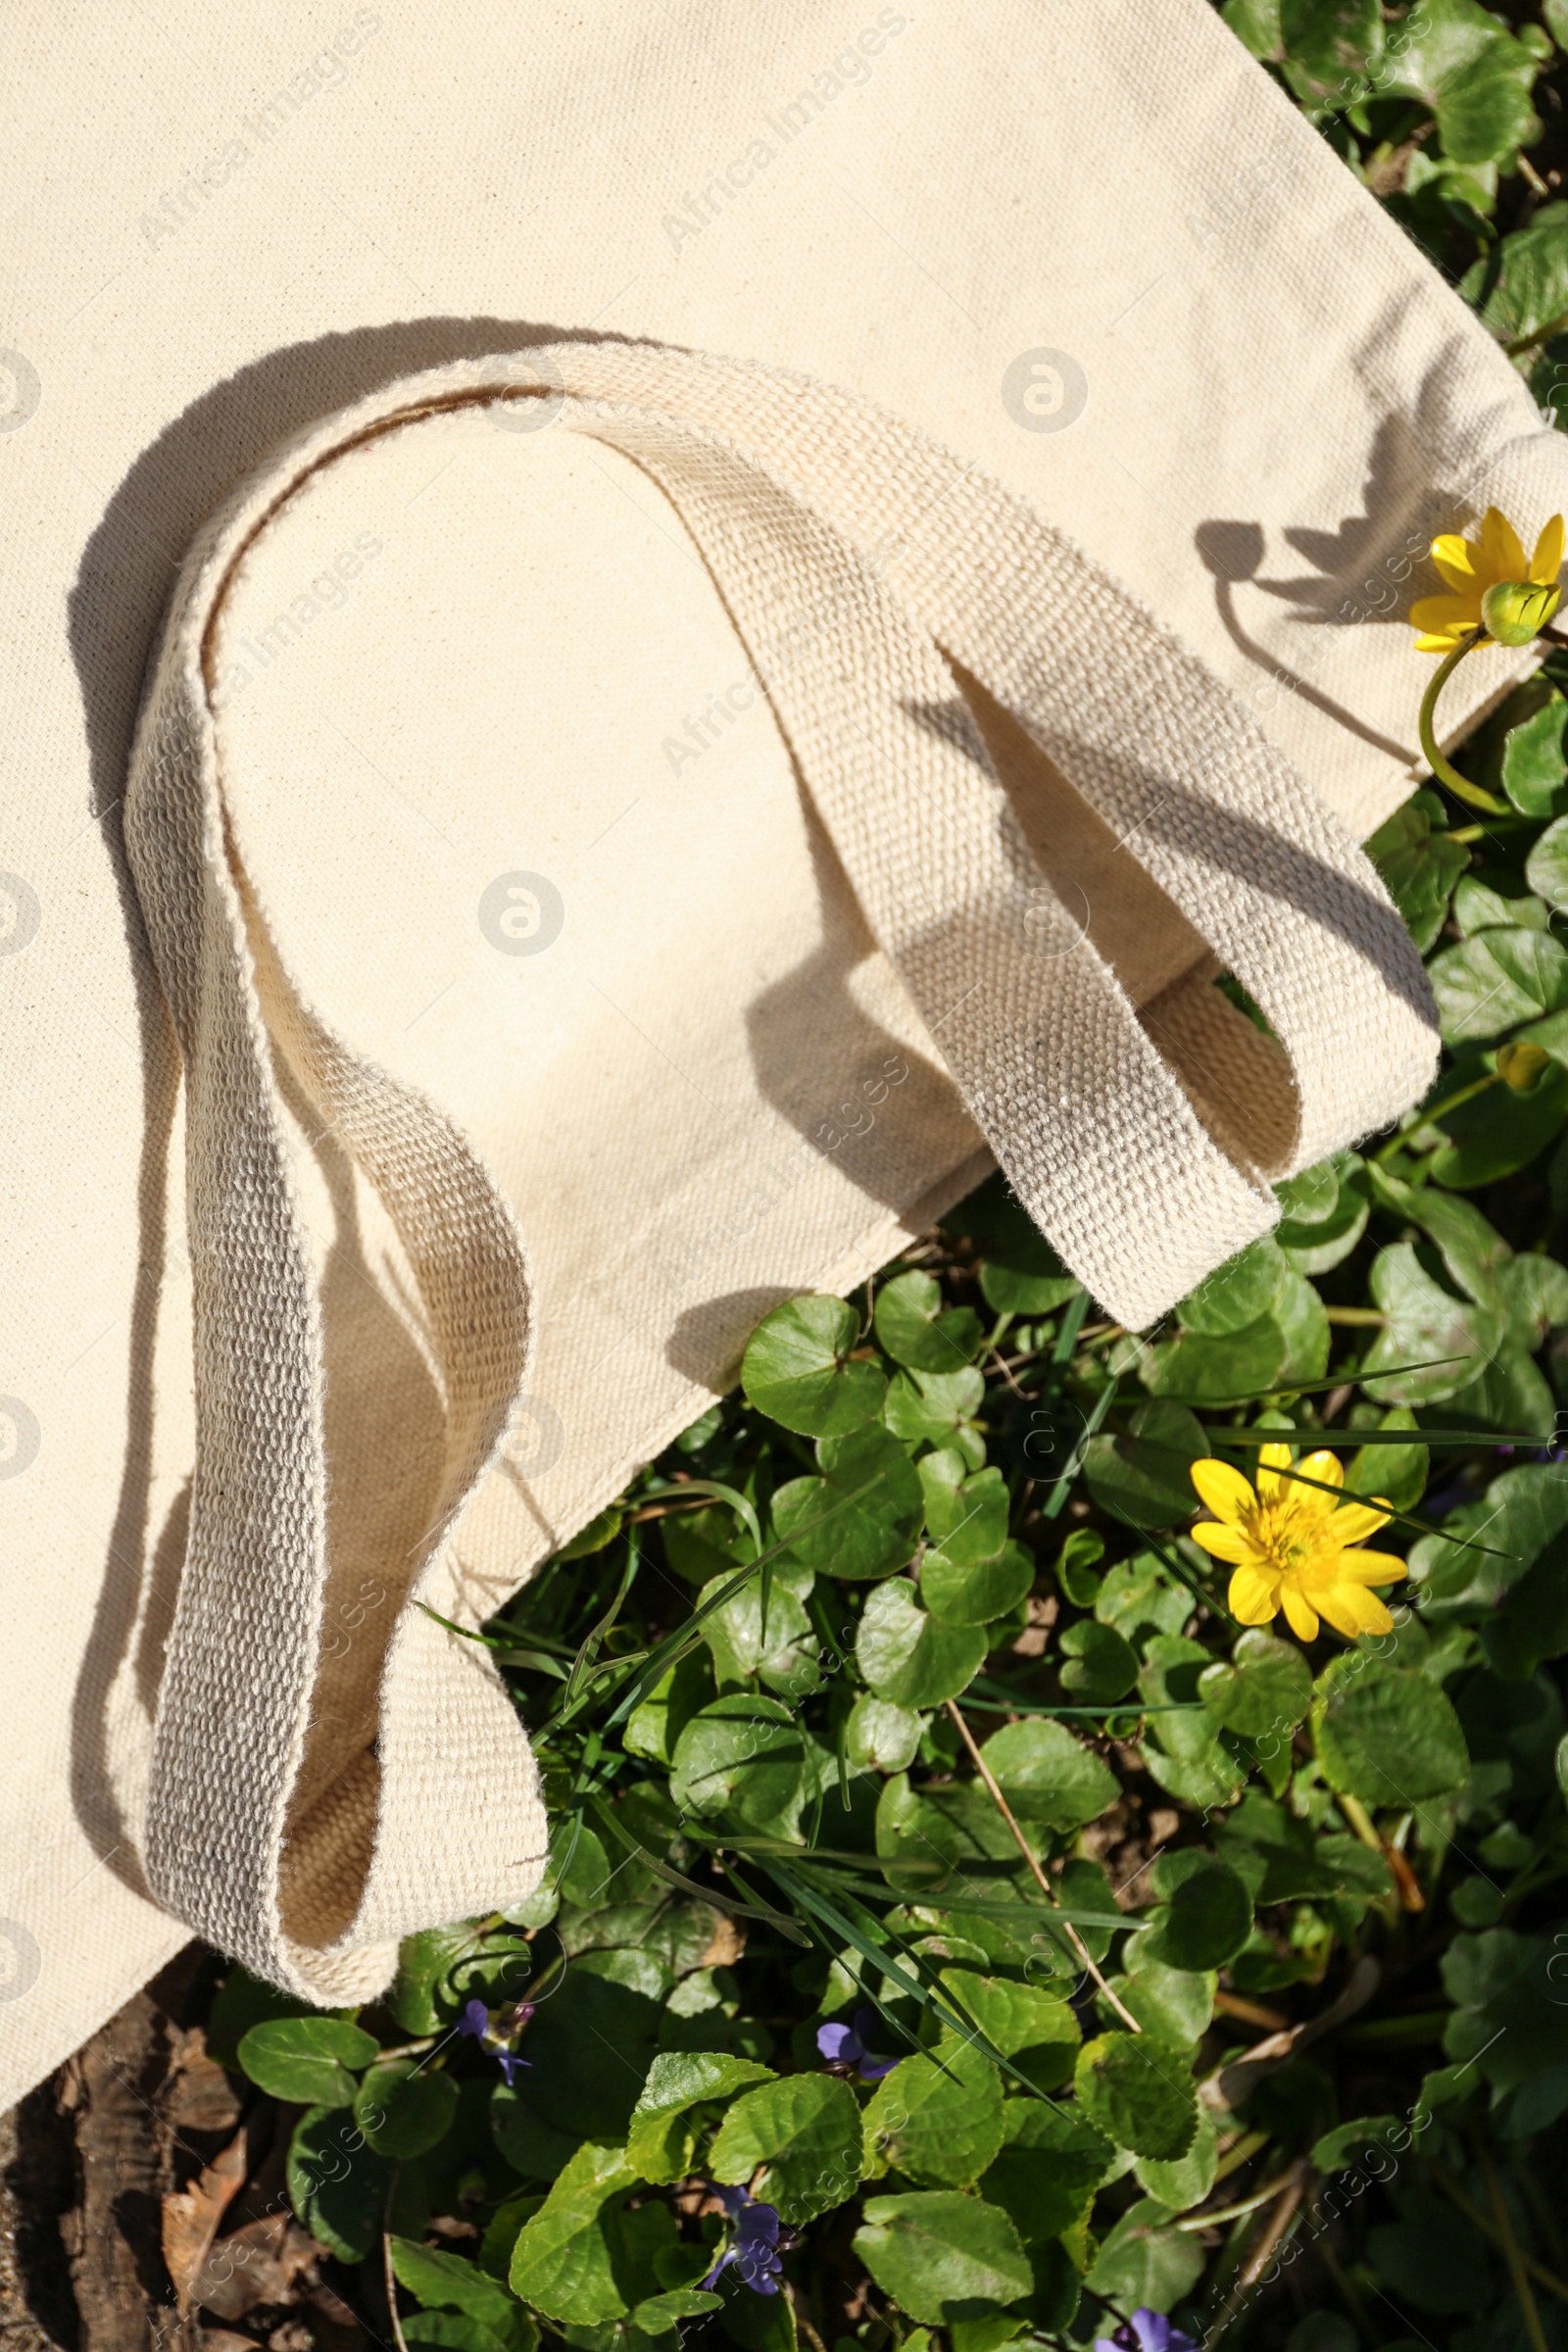 Photo of Cotton bag on grass outdoors, top view